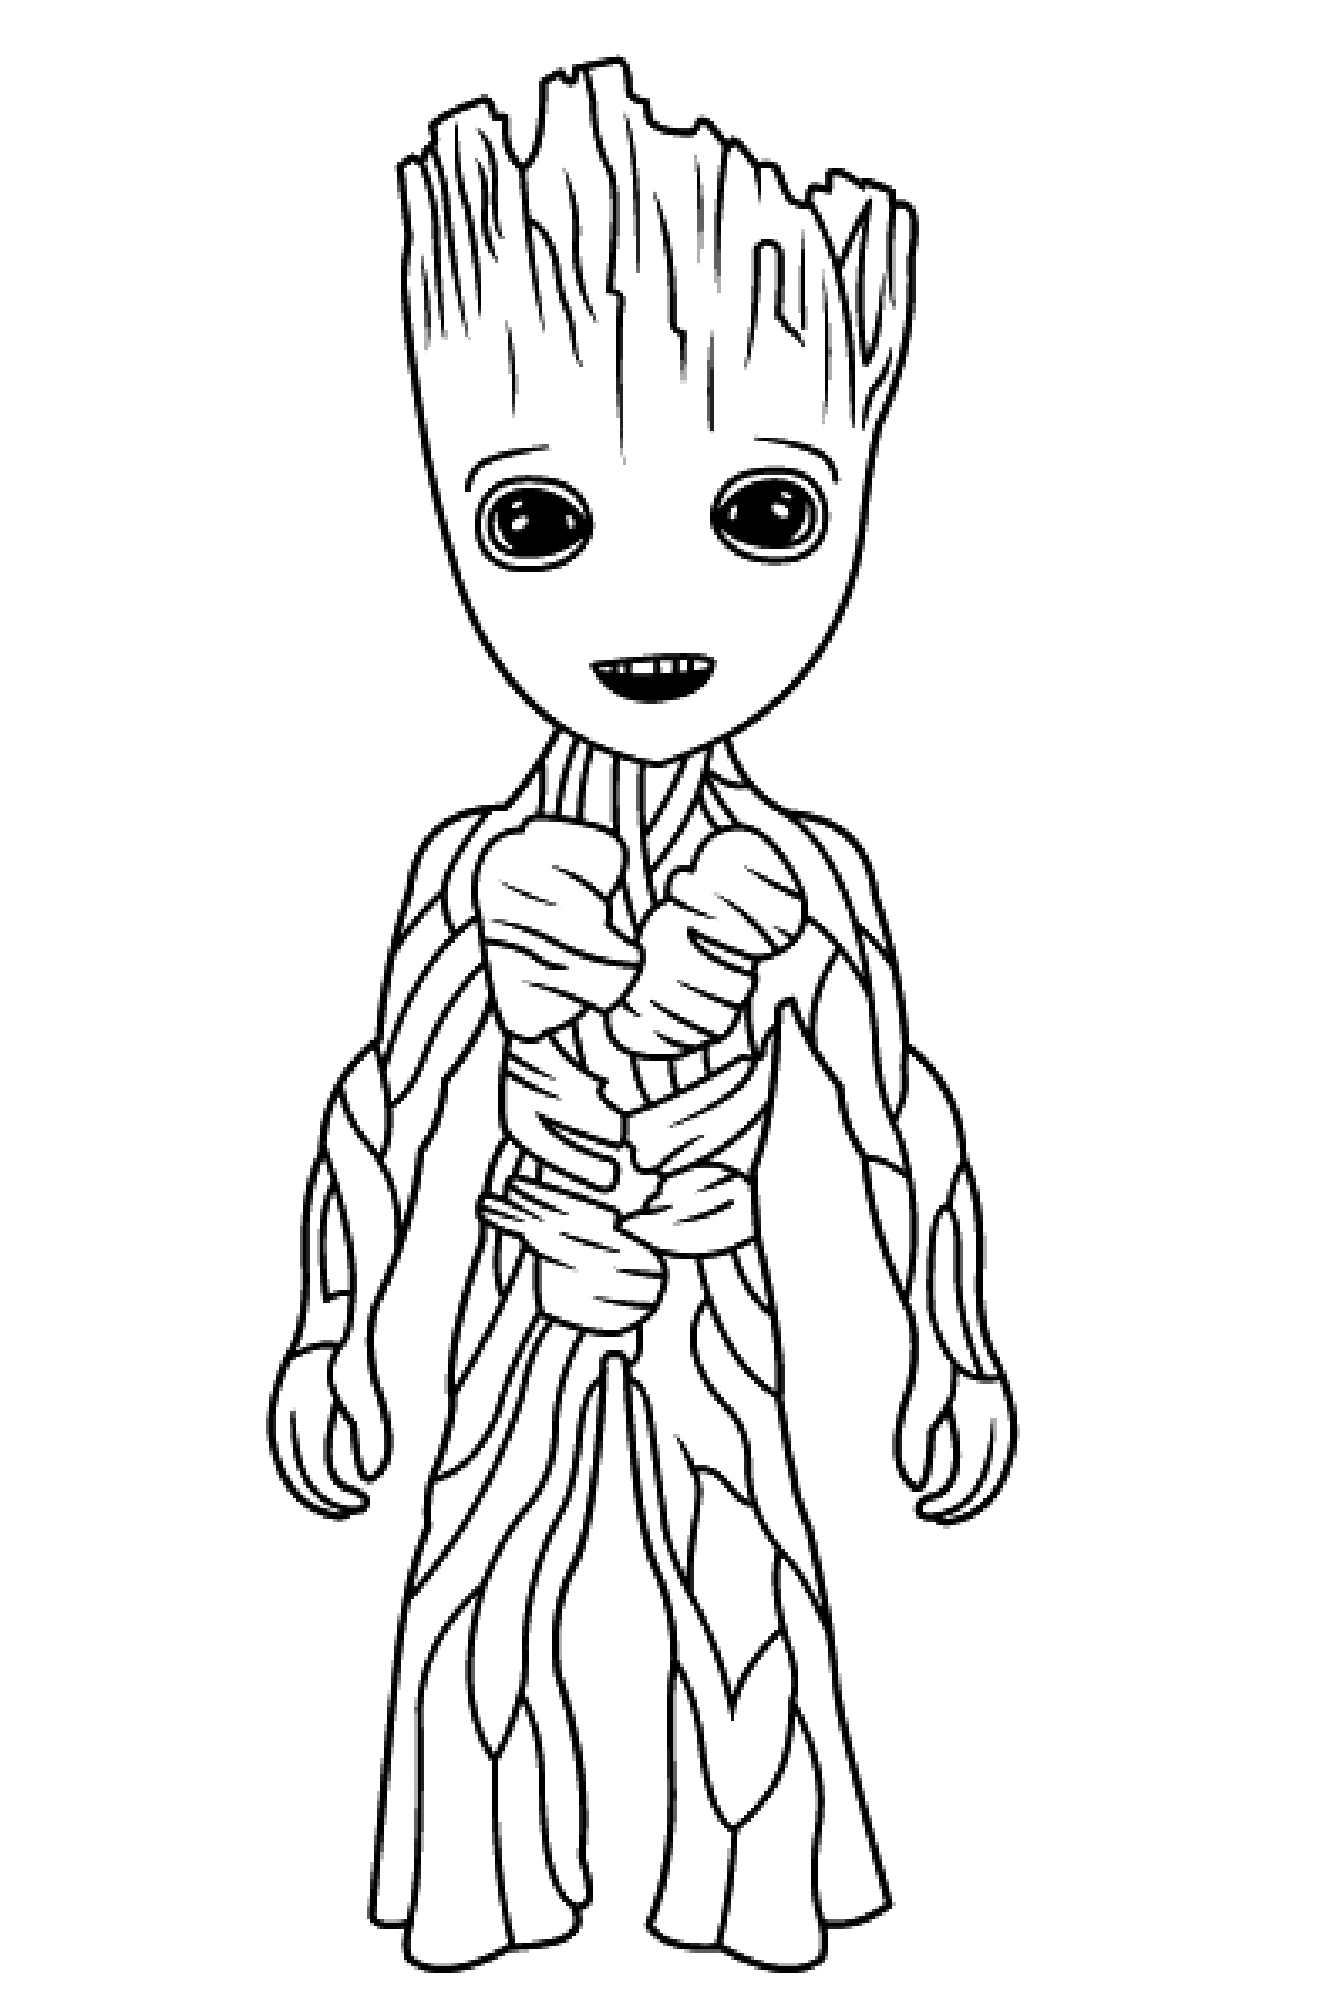 Simple Guardians of Galaxy coloring page for children : Groot